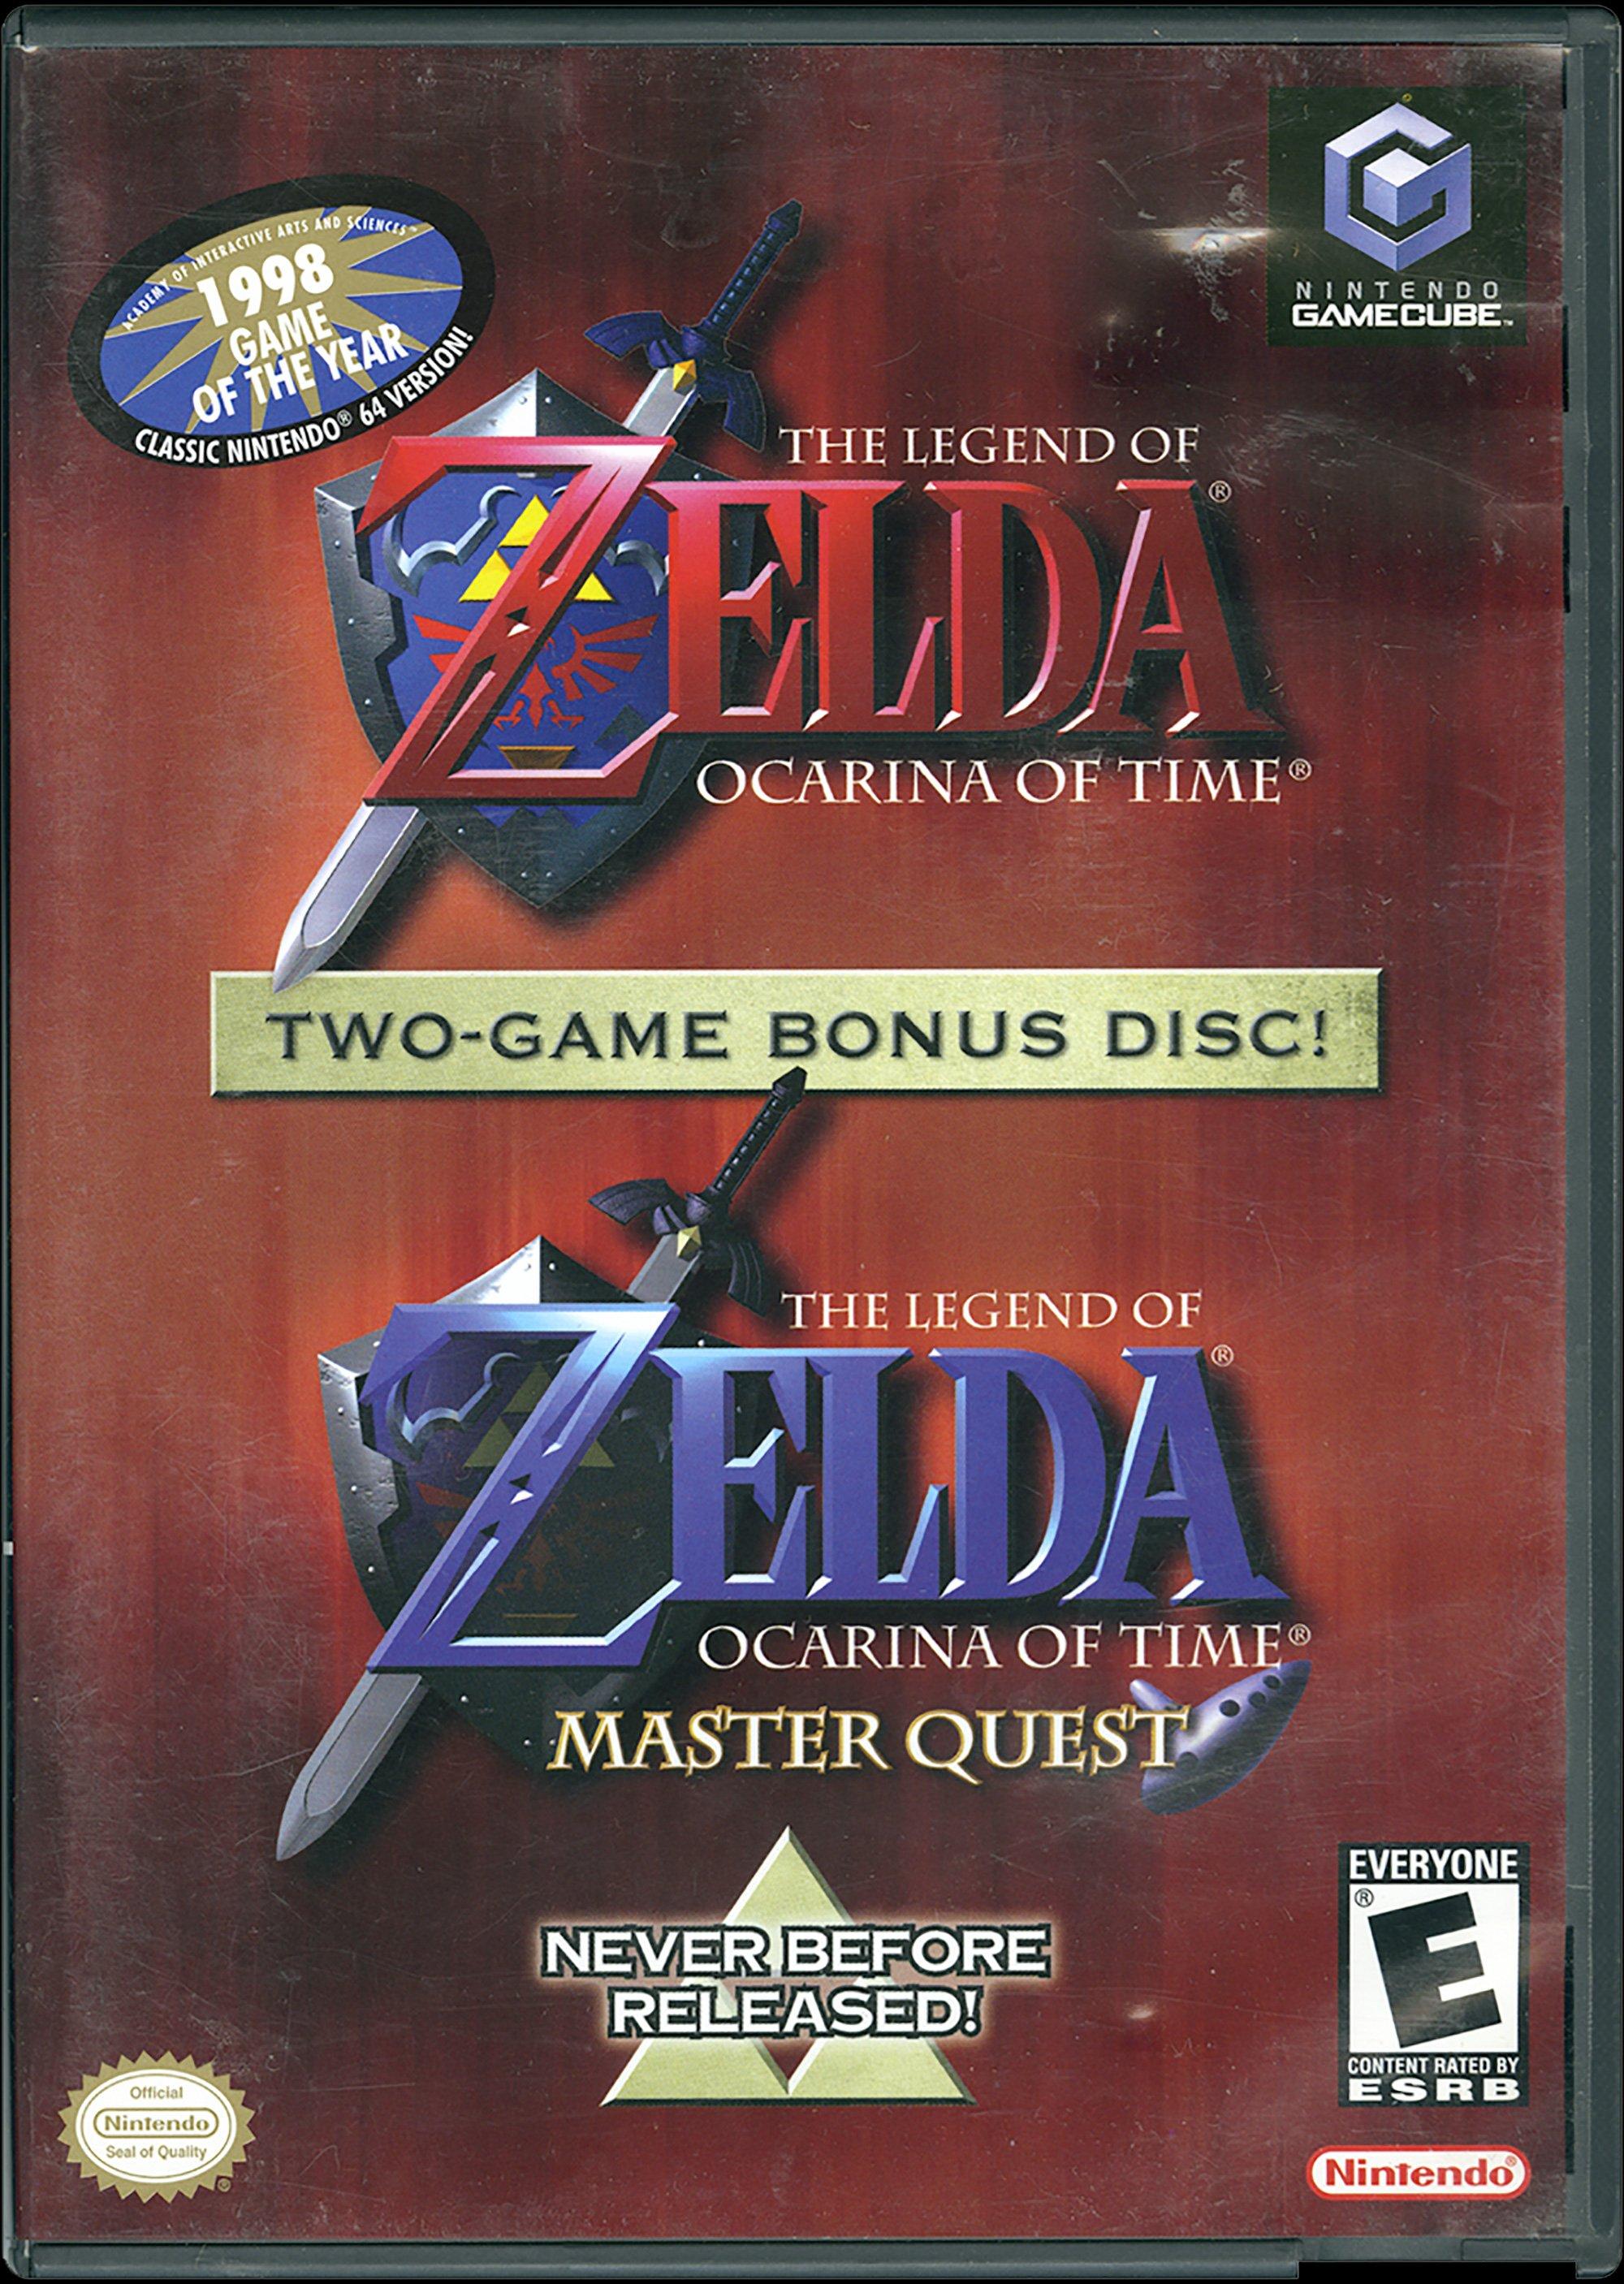 the-legend-of-zelda-ocarina-of-time-and-master-quest-gamecube